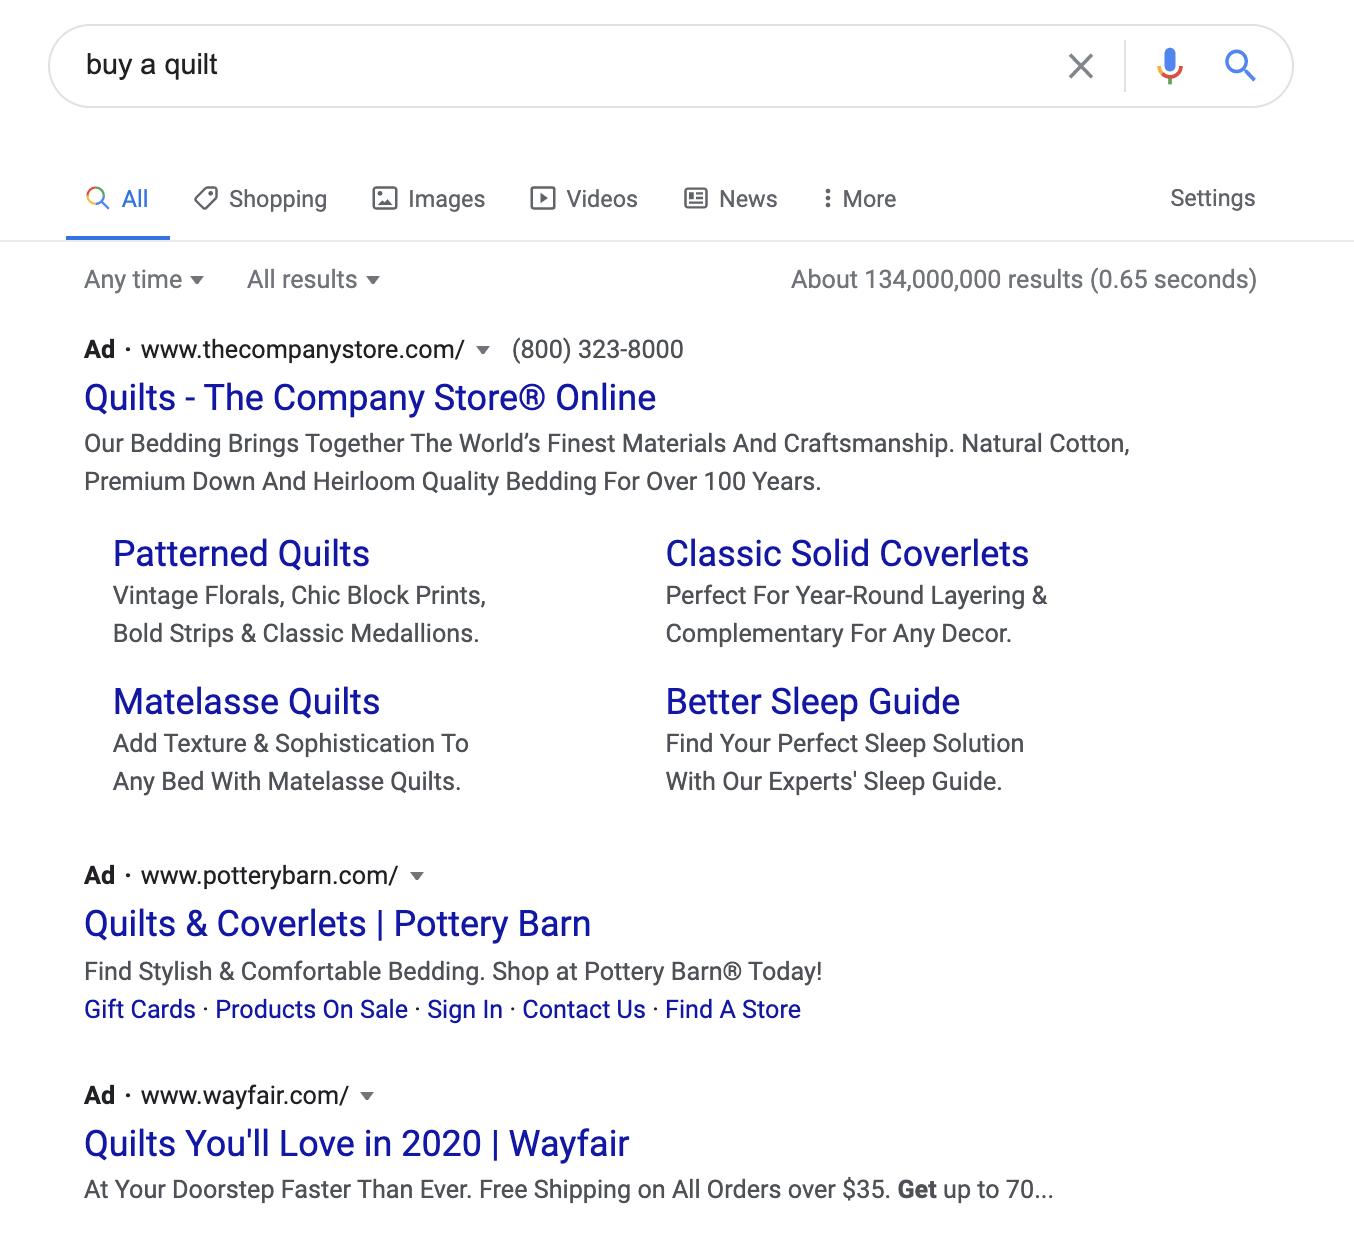 google ads for buy a quilt